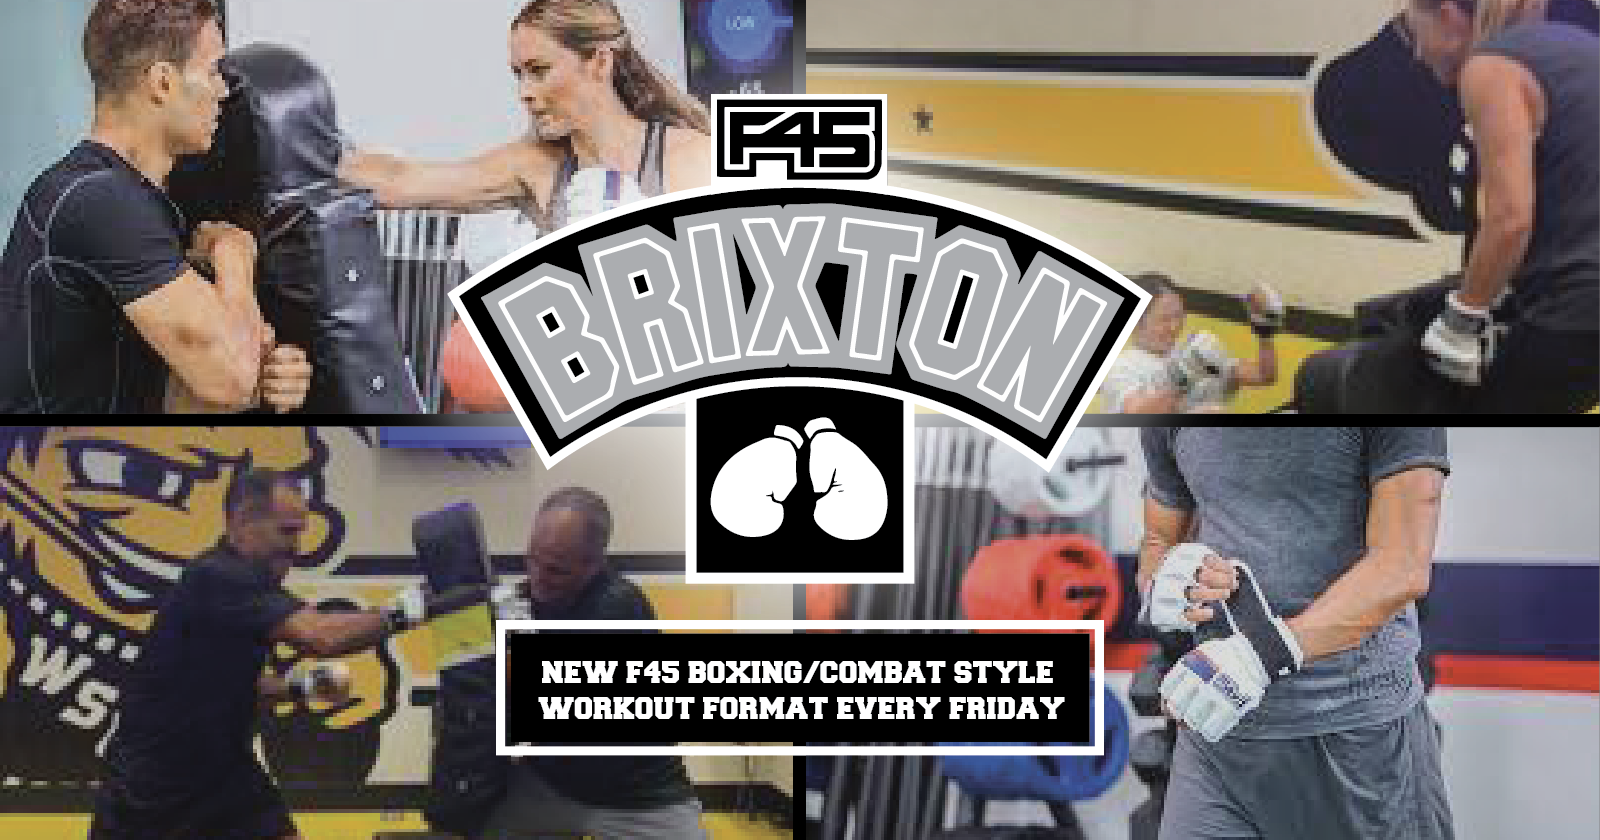 F45 BRIXTON new f45 boxing/combat style workout format every friday